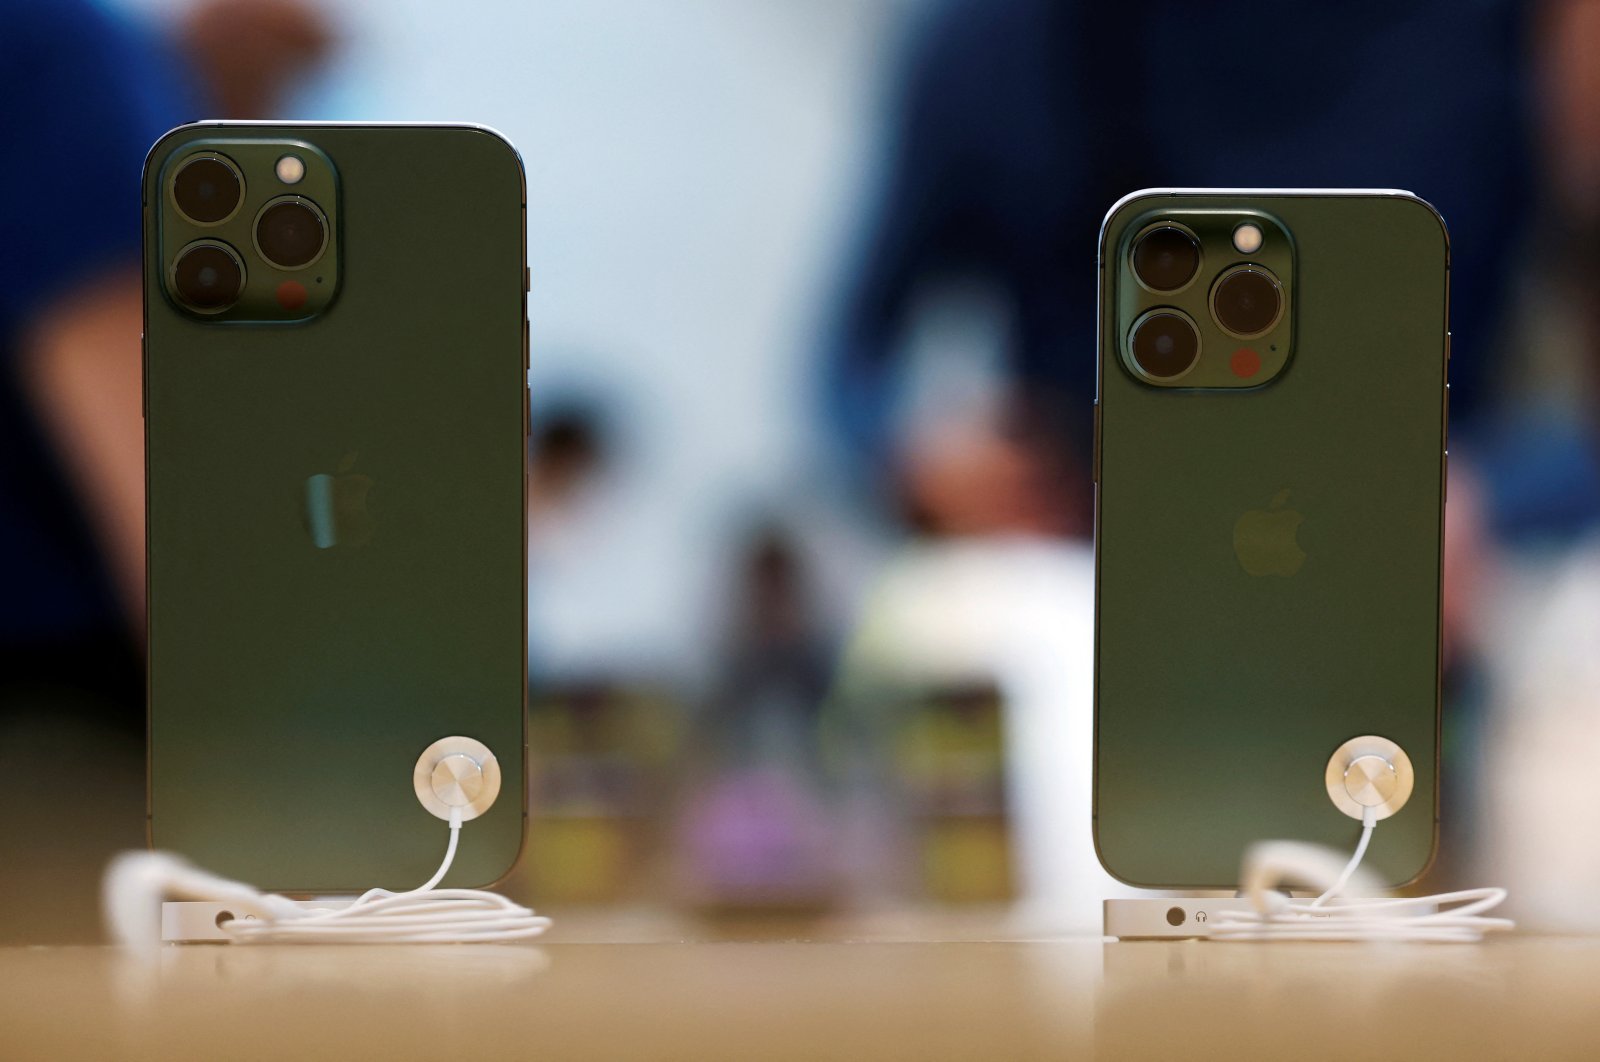 Apple iPhone 13 Pro models in the color &quot;alpine green” are displayed at an Apple shop in Singapore, March 18, 2022. (Reuters Photo)